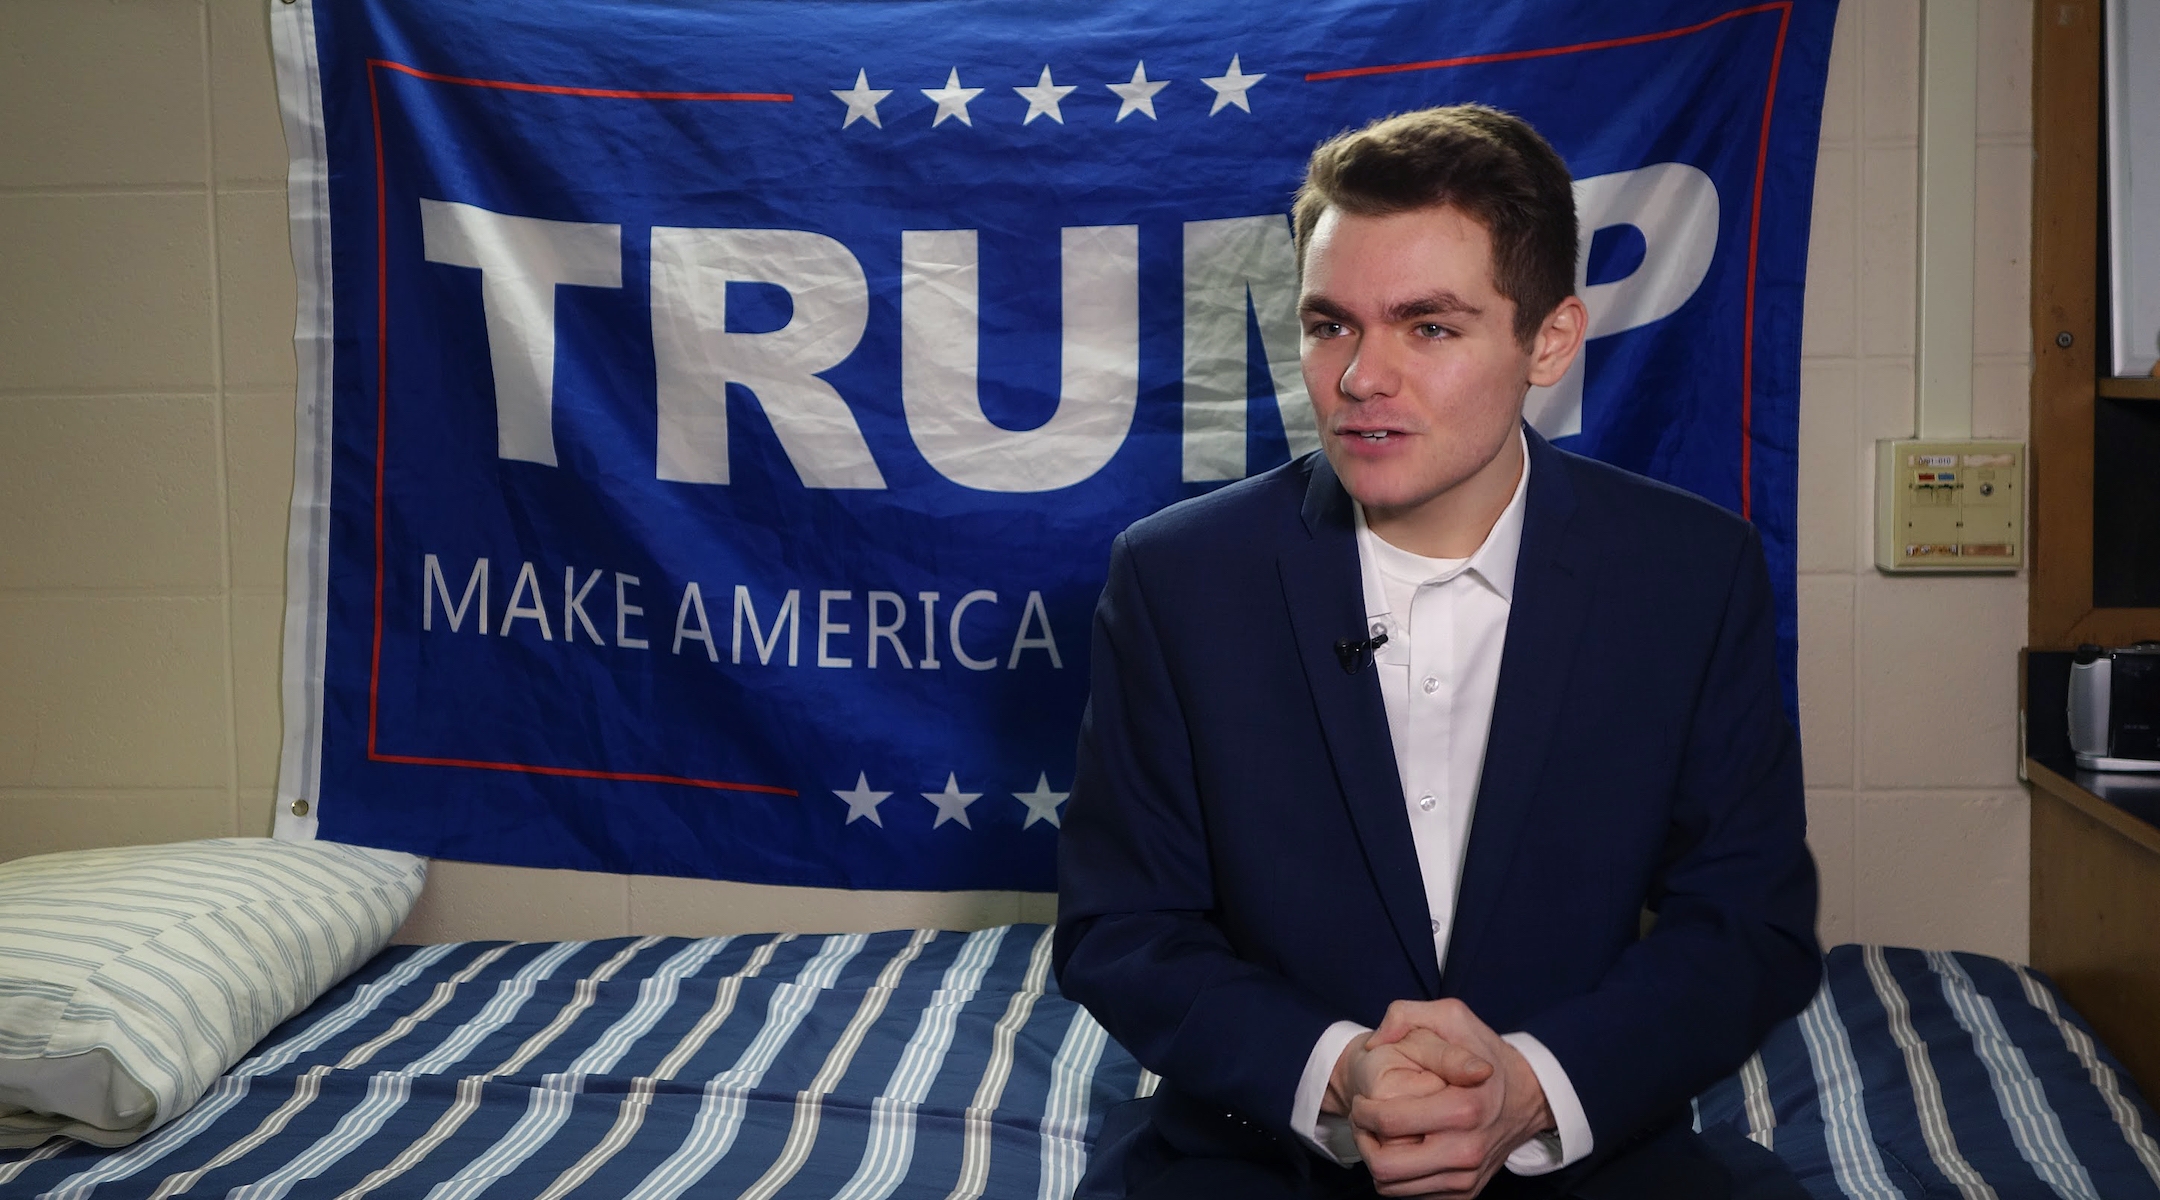 Nick Fuentes, answers questions during an interview with Agence France-Presse in Boston, May 9, 2016. (William Edwards/AFP via Getty Images)